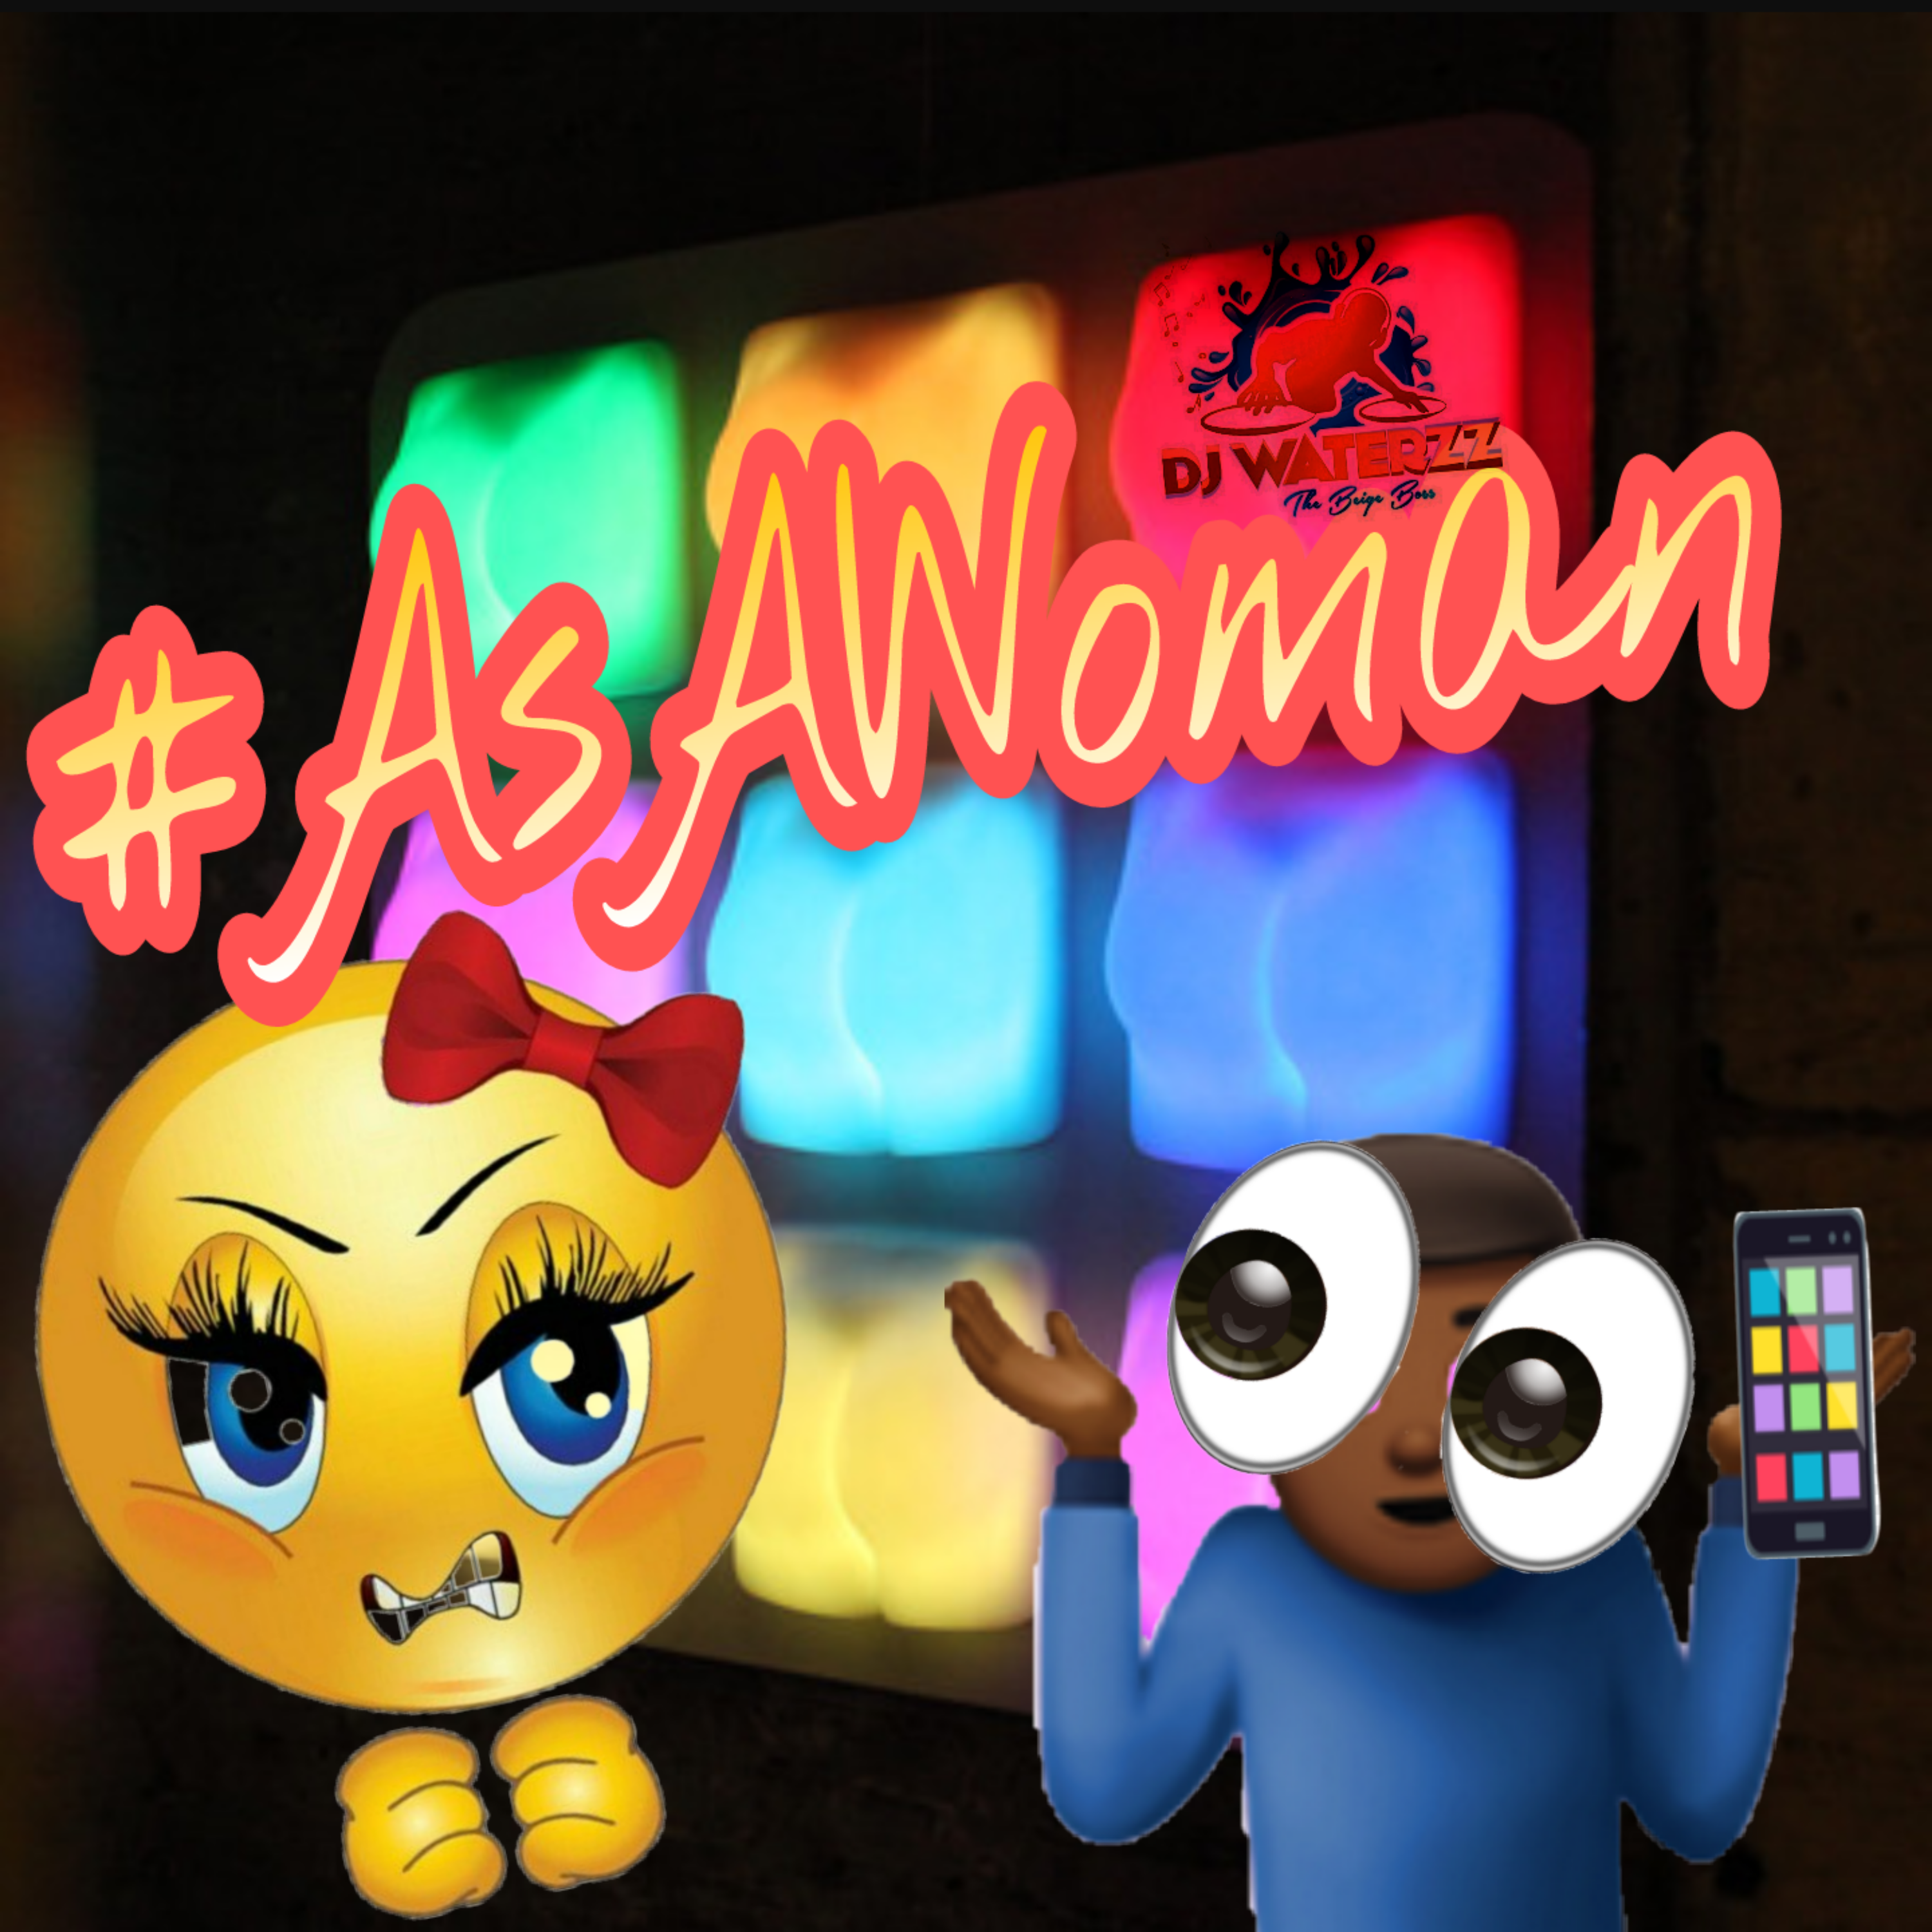 DJ Waterzz Ends Up Under A Bad Chick’s Spell In “As a Woman” (Review & Stream)